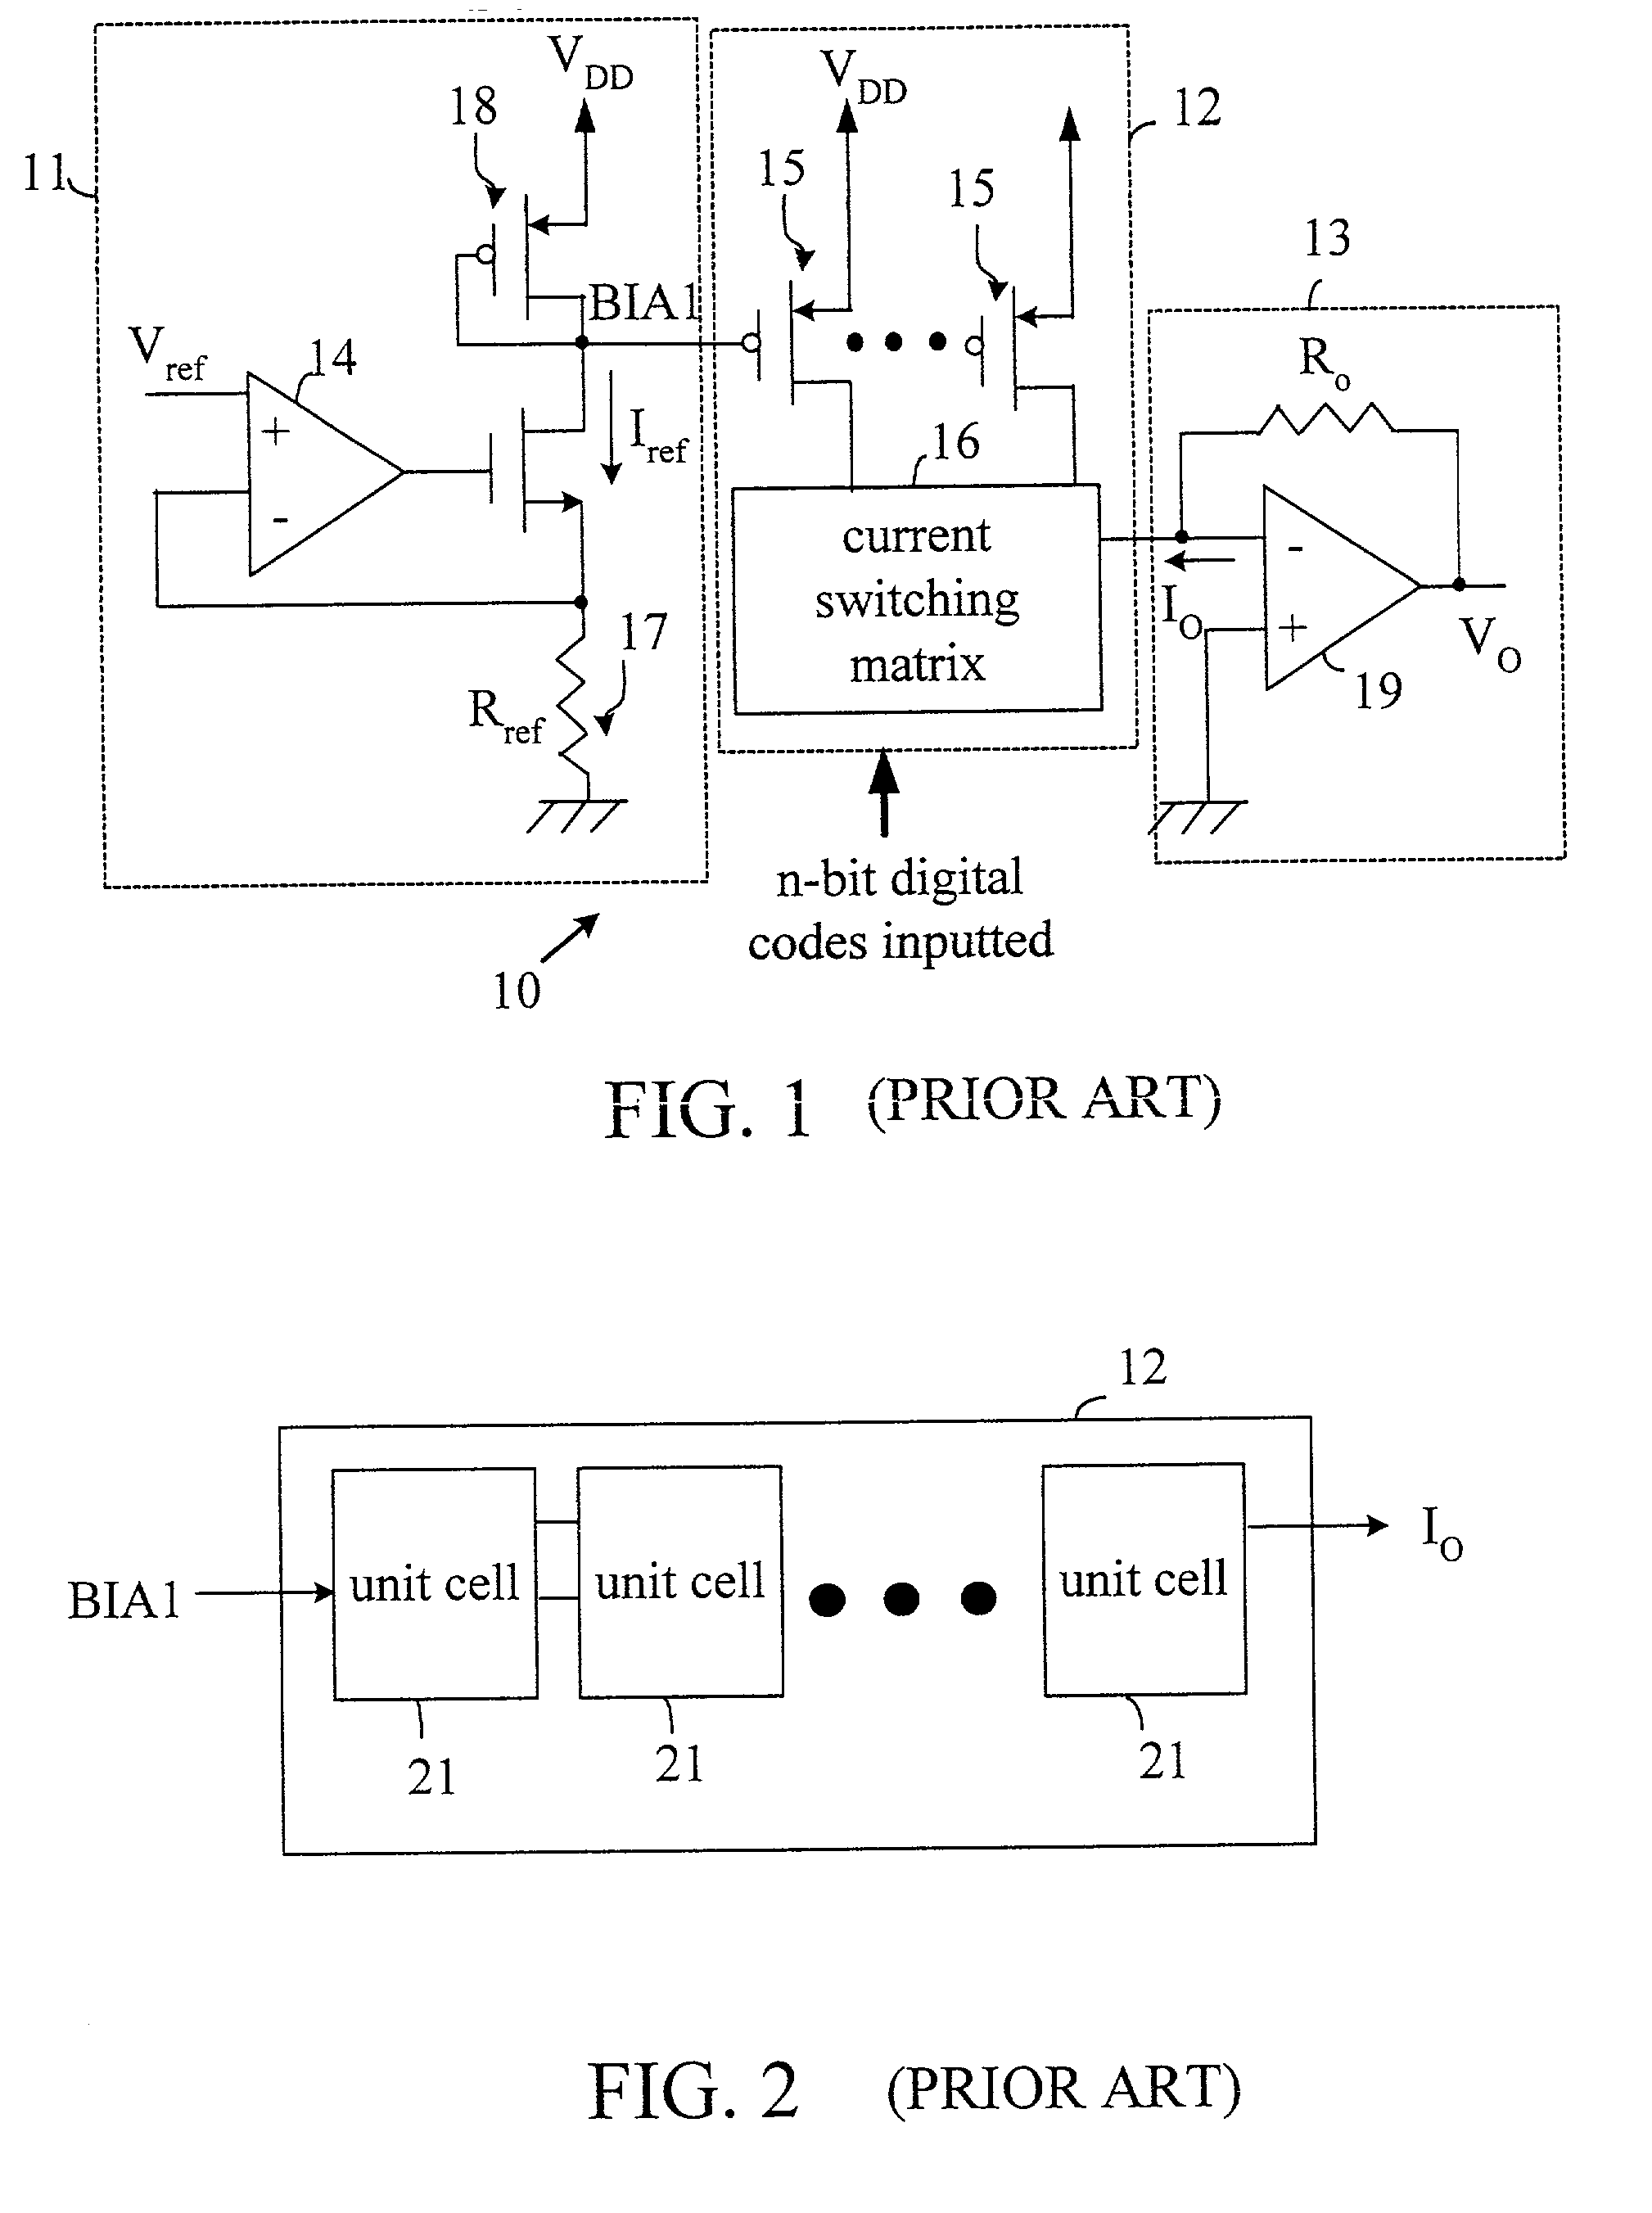 Current-steering D/A converter and unit cell